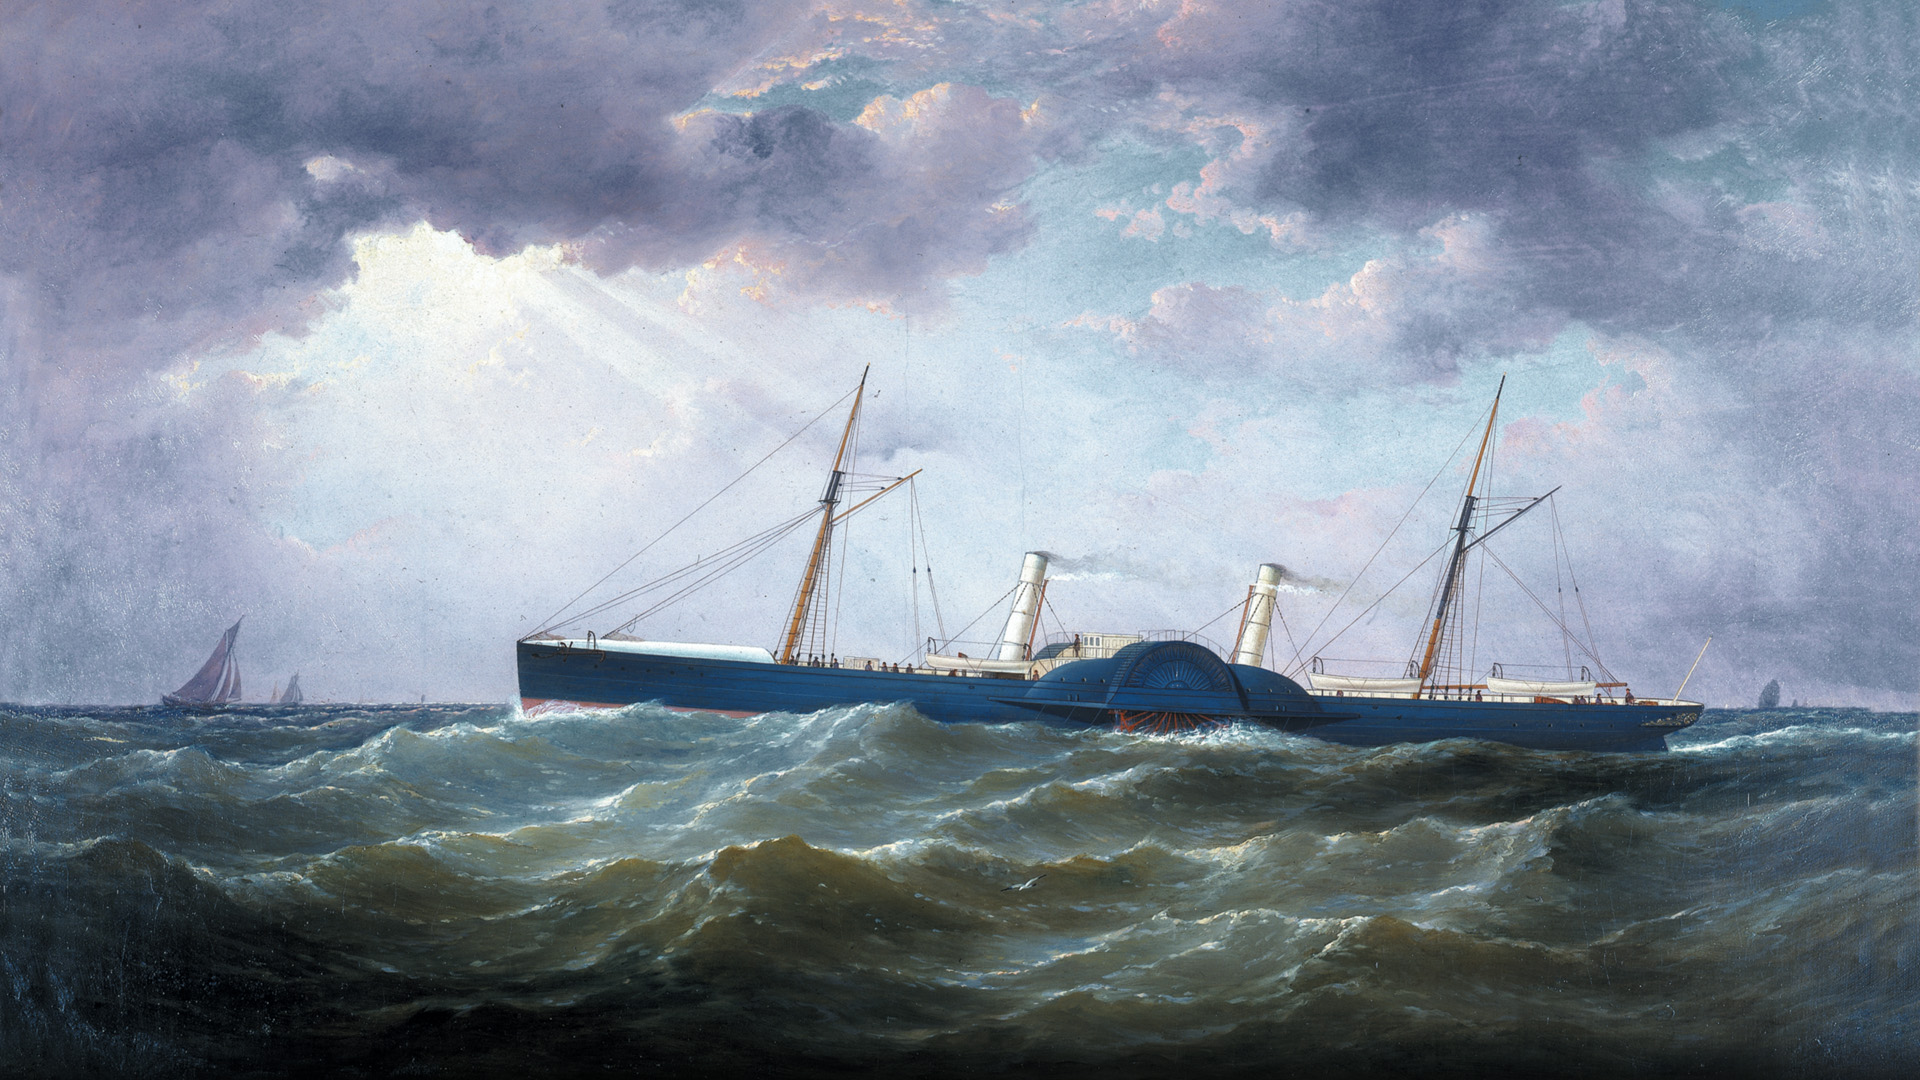 The Scottish-built, 252-foot-long blockade-runner Banshee II represented the state of the art in mid-19th-century shipbuilding. Giant sidewheels drove her through the water at nearly 16 knots.